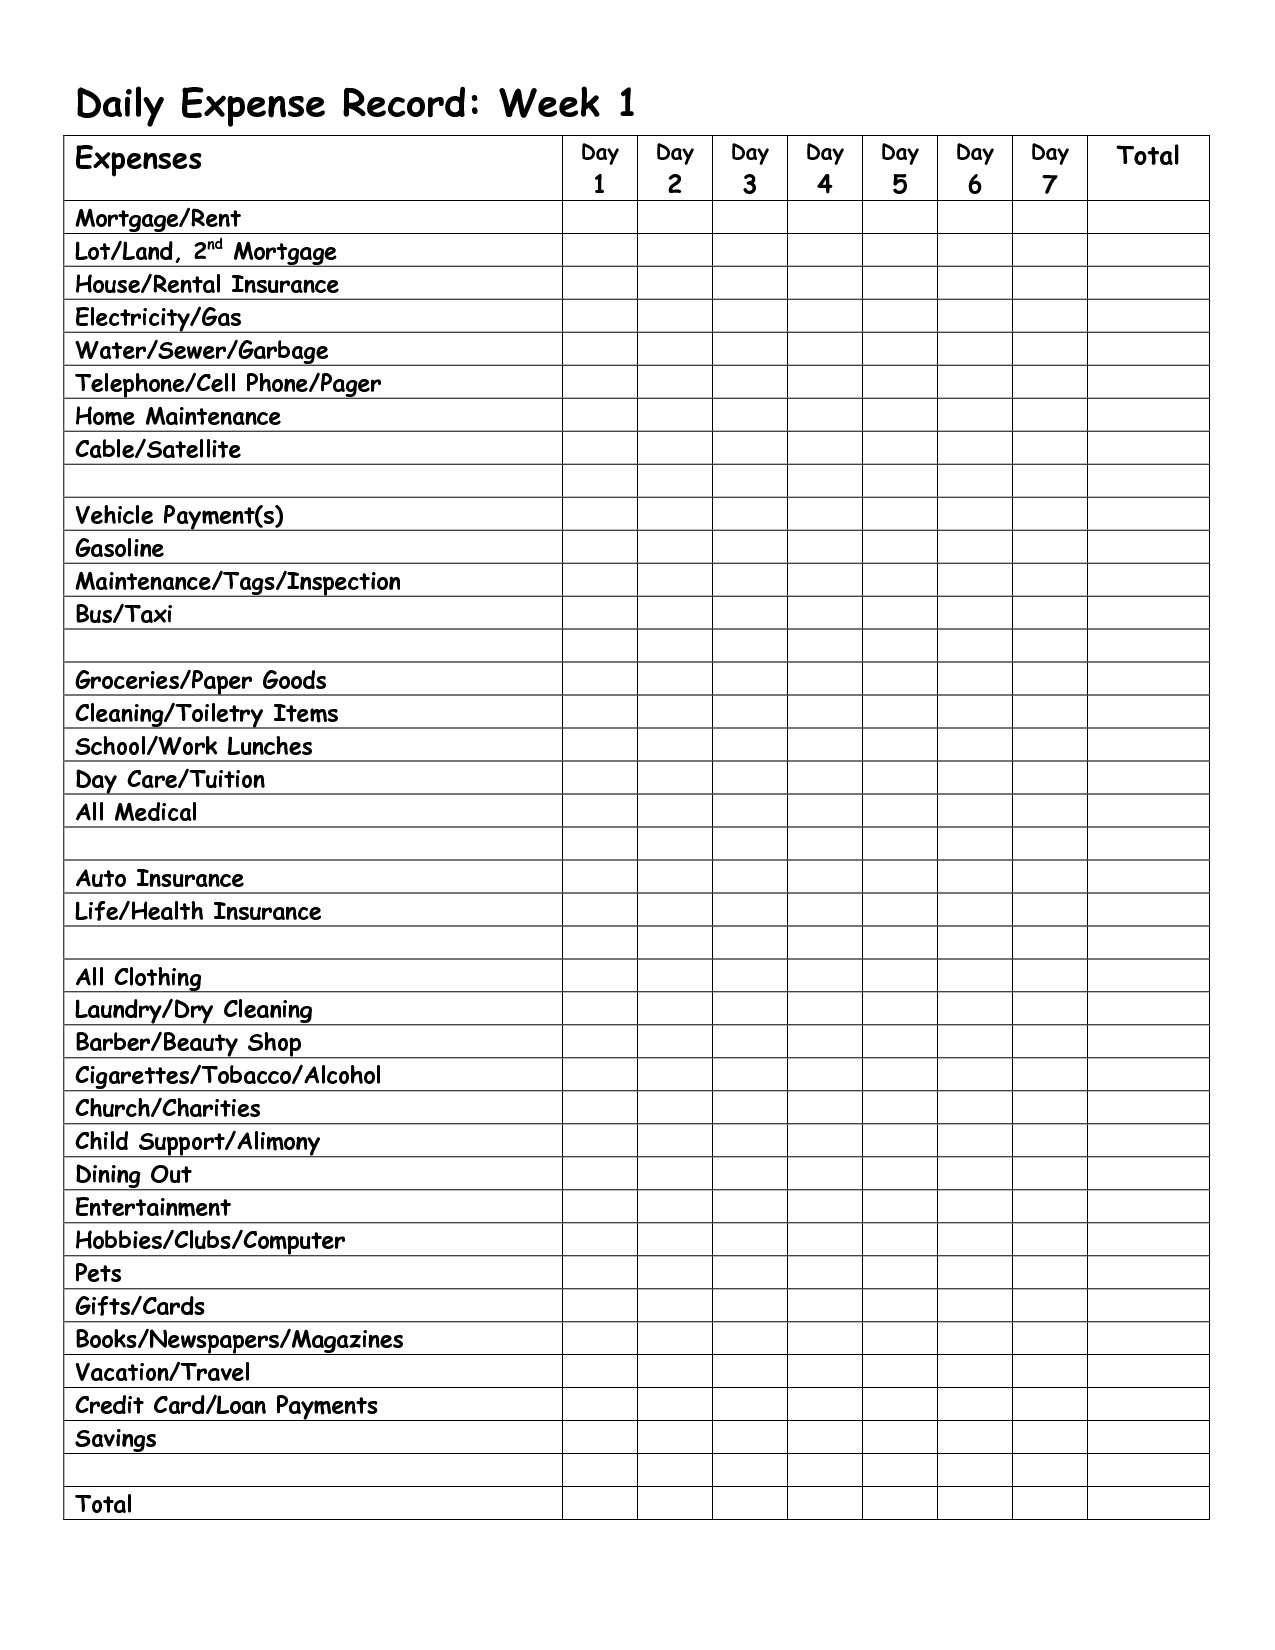 Monthly Expense Report Template | Daily Expense Record Week 1  Monthly Bills Template With Account Number And Address